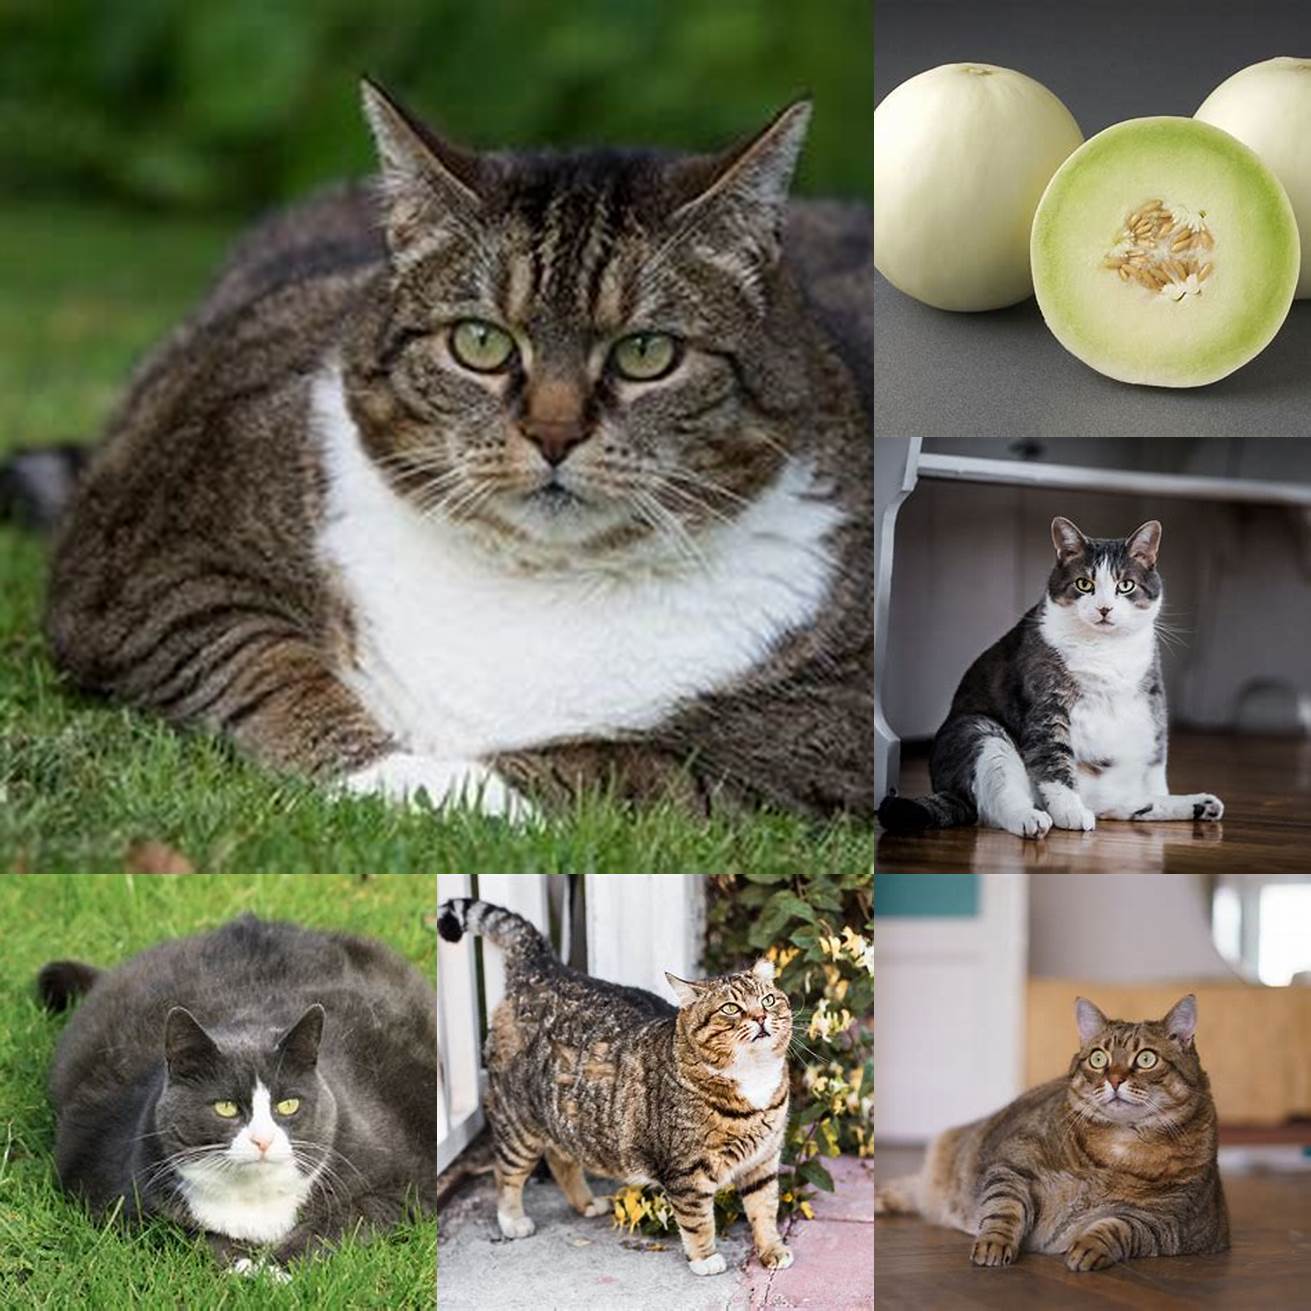 Honeydew is low in calories and fat making it a great option for overweight or obese cats